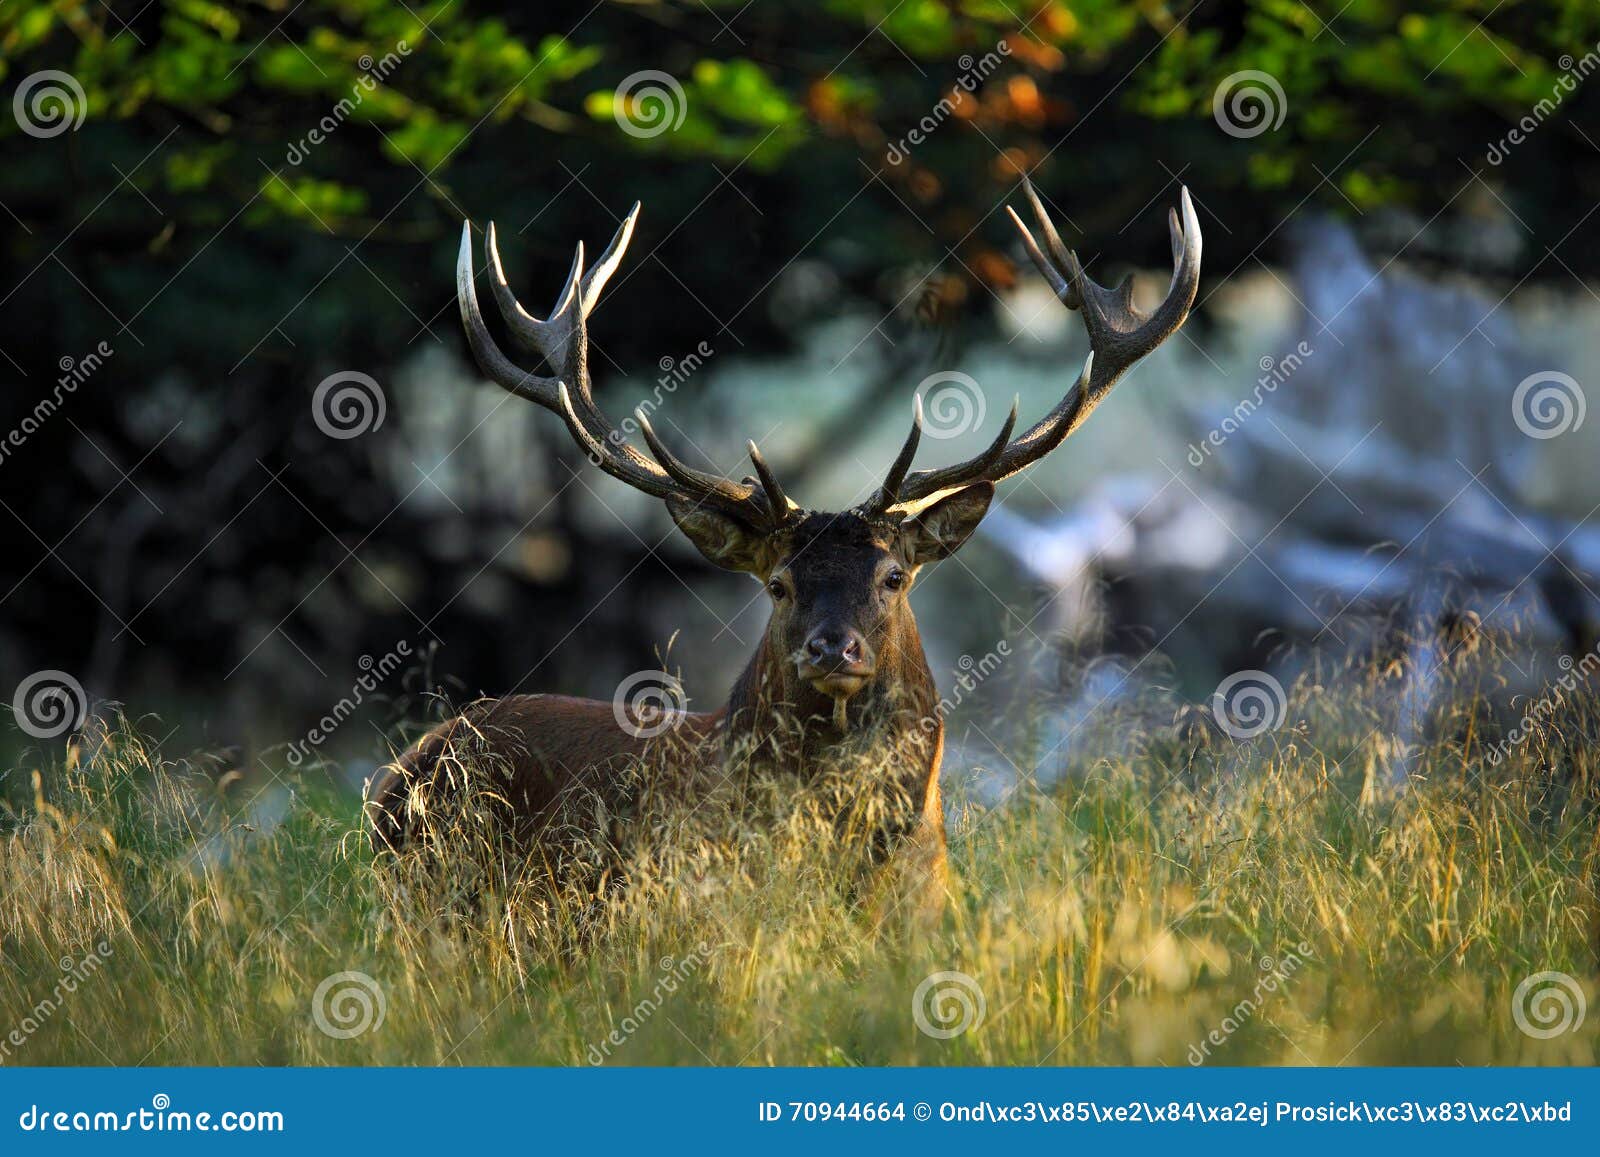 deer, bellow majestic powerful adult red deer stag outside autumn forest, animal lying in the grass, nature habitat, france